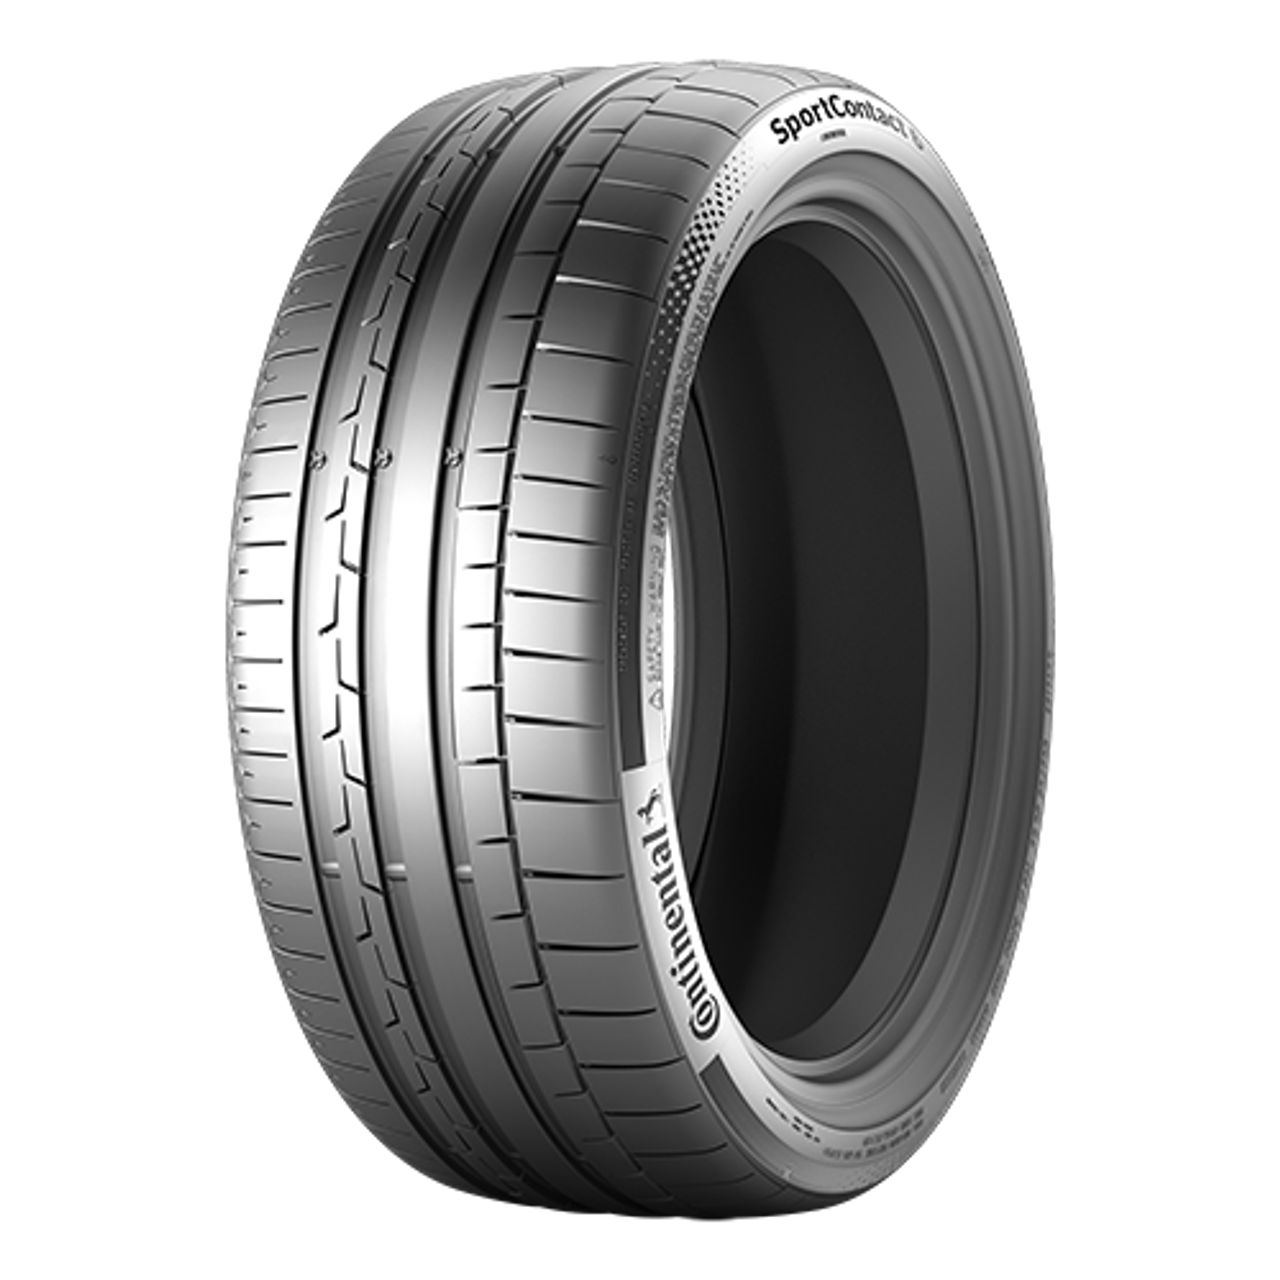 CONTINENTAL SPORTCONTACT 6 (MO1) (EVc) 235/35ZR19 91Y FR BSW